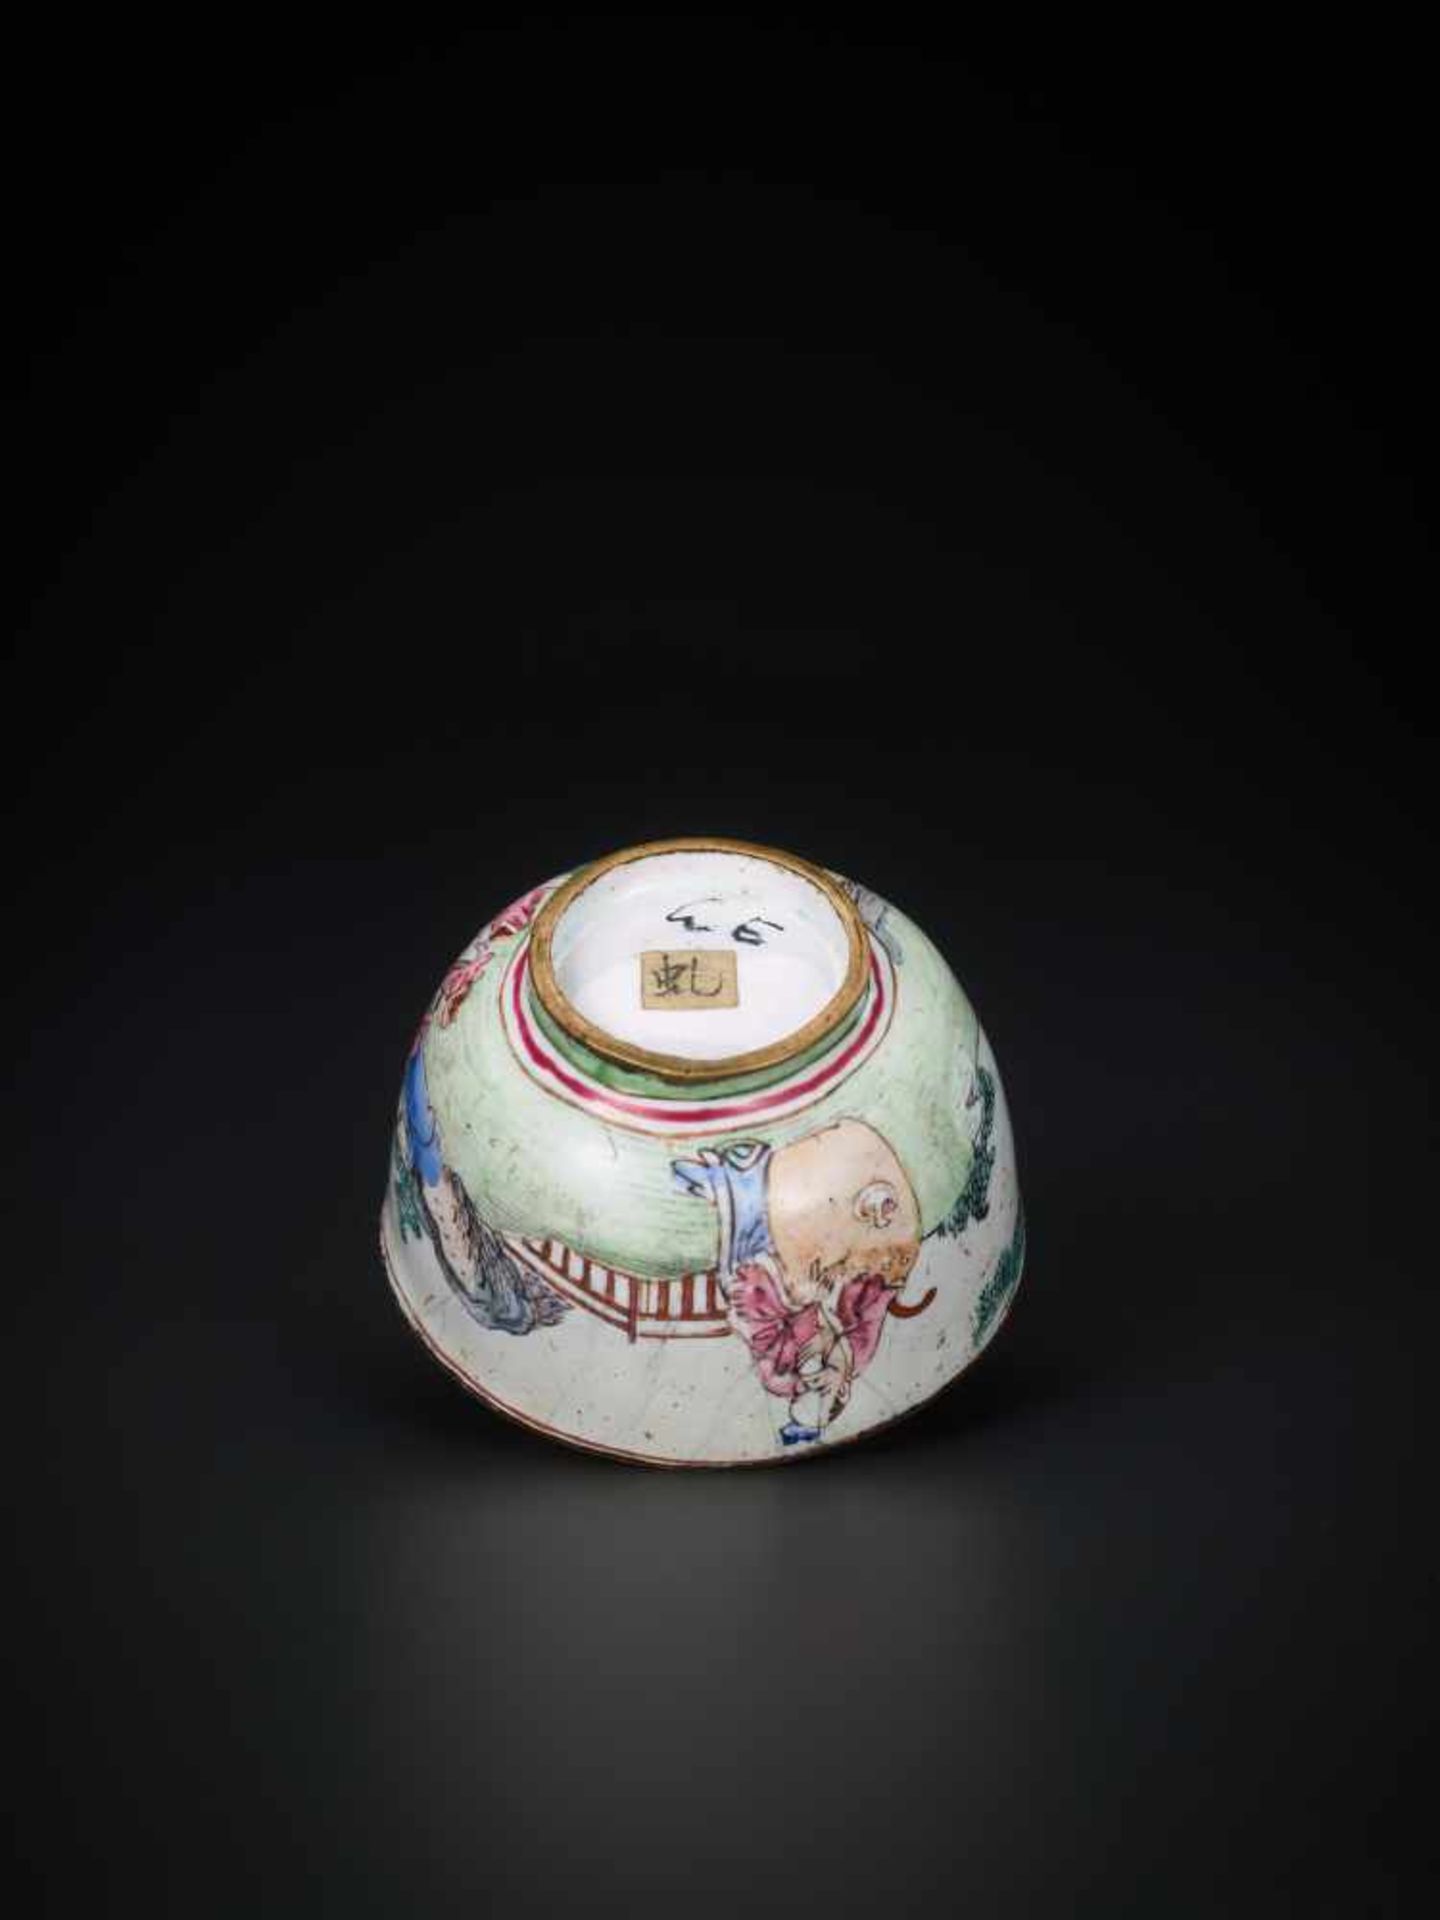 AN 18th CENTURY CANTON ENAMEL MINIATURE WINE CUP WITH SCHOLARS Enamel on bronze, multicolored - Image 6 of 7